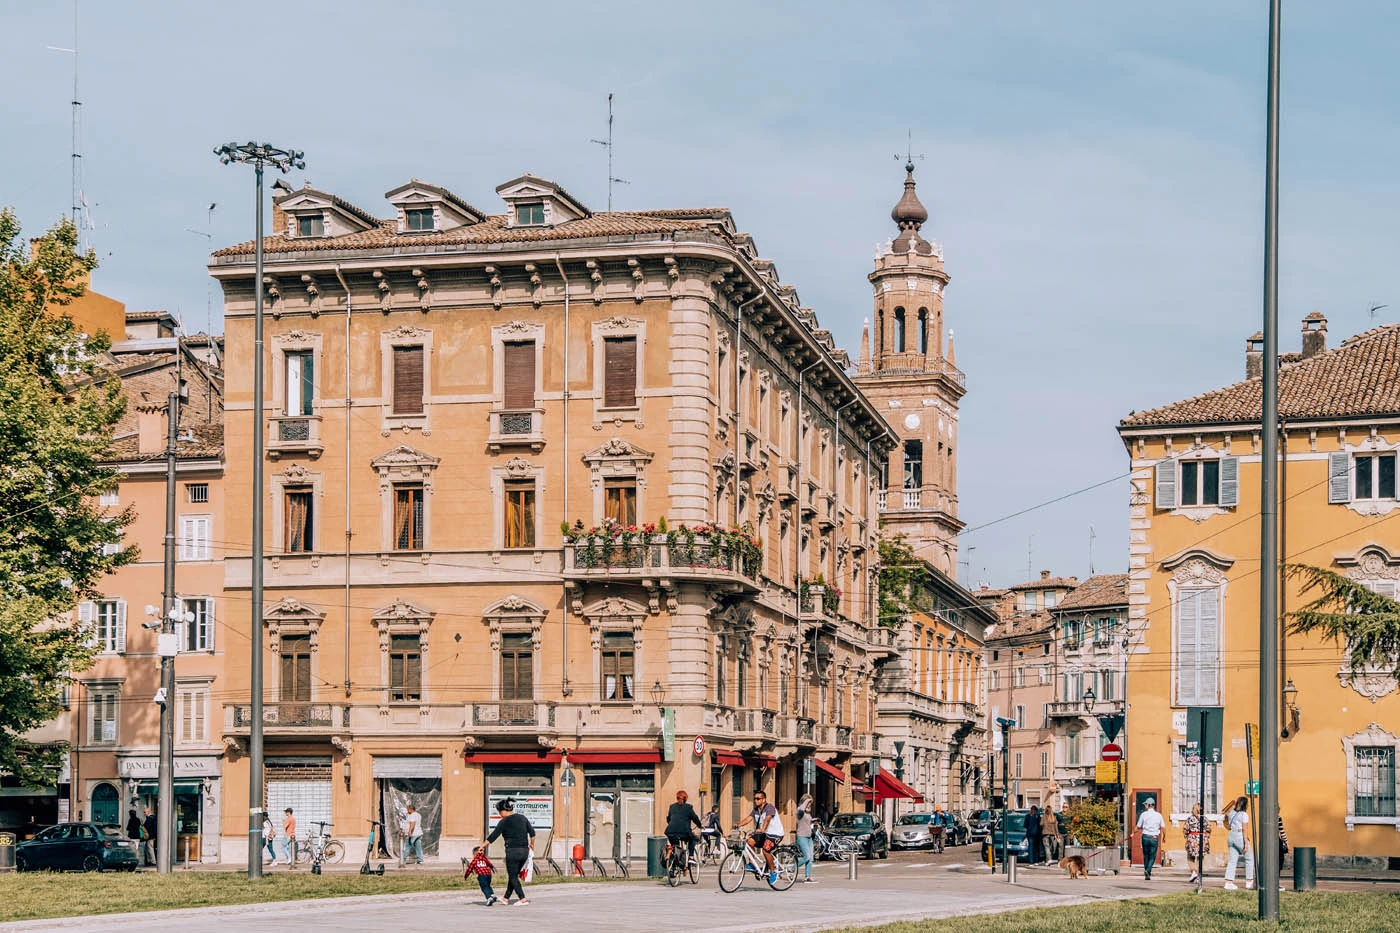 BEST Things to do in Parma Italy - Piazza della Pace